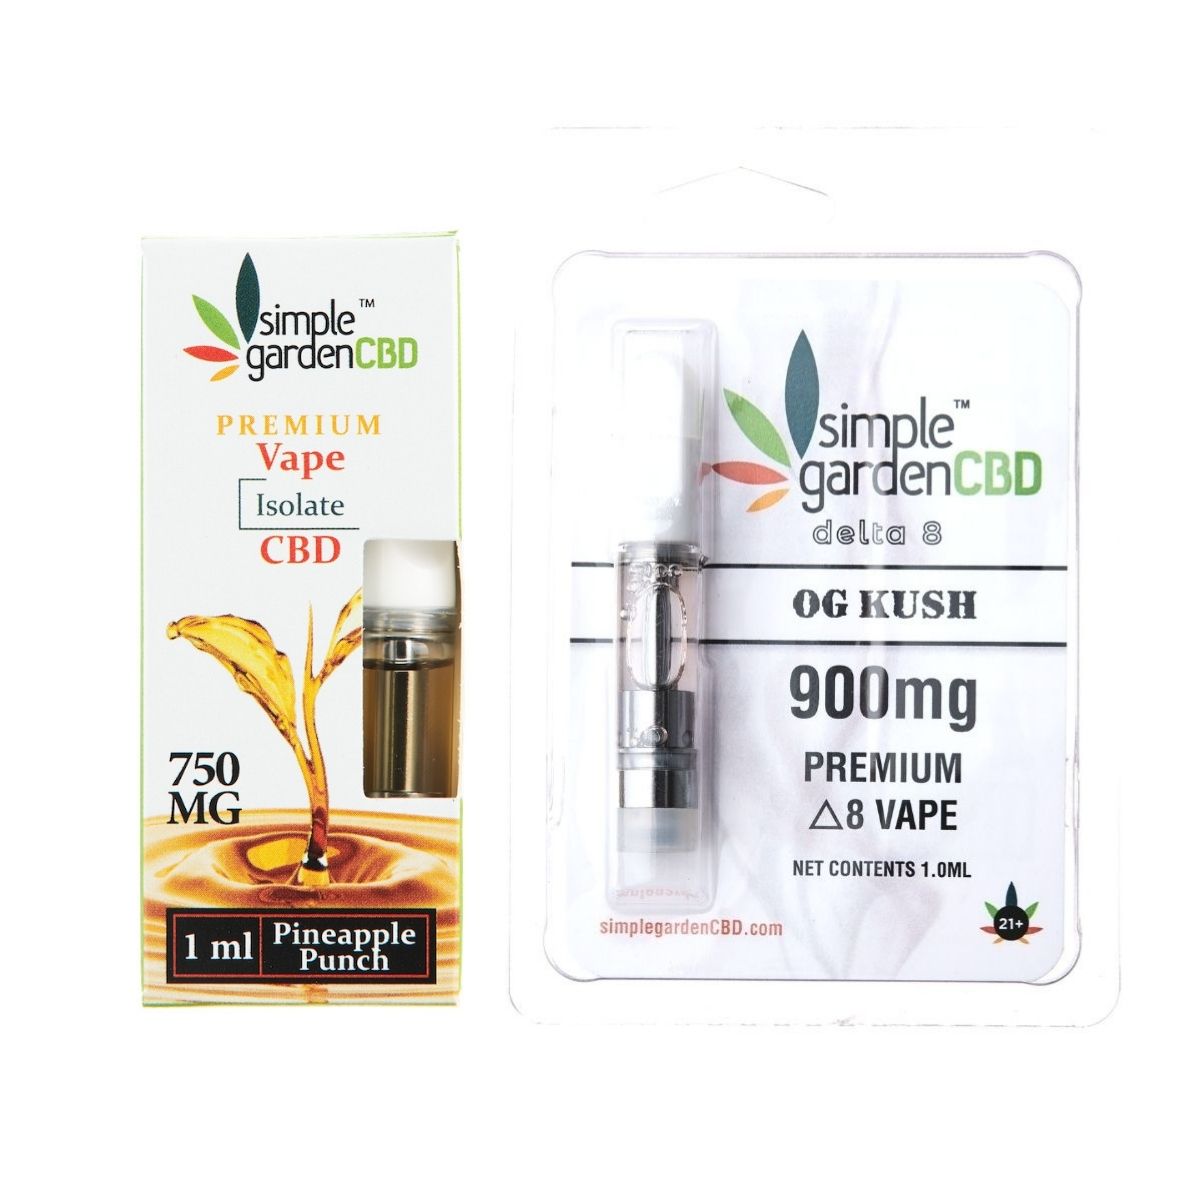 Front packaging of Isolate CBD and Delta 8 THC vape carts sold by Simple Garden CBD.